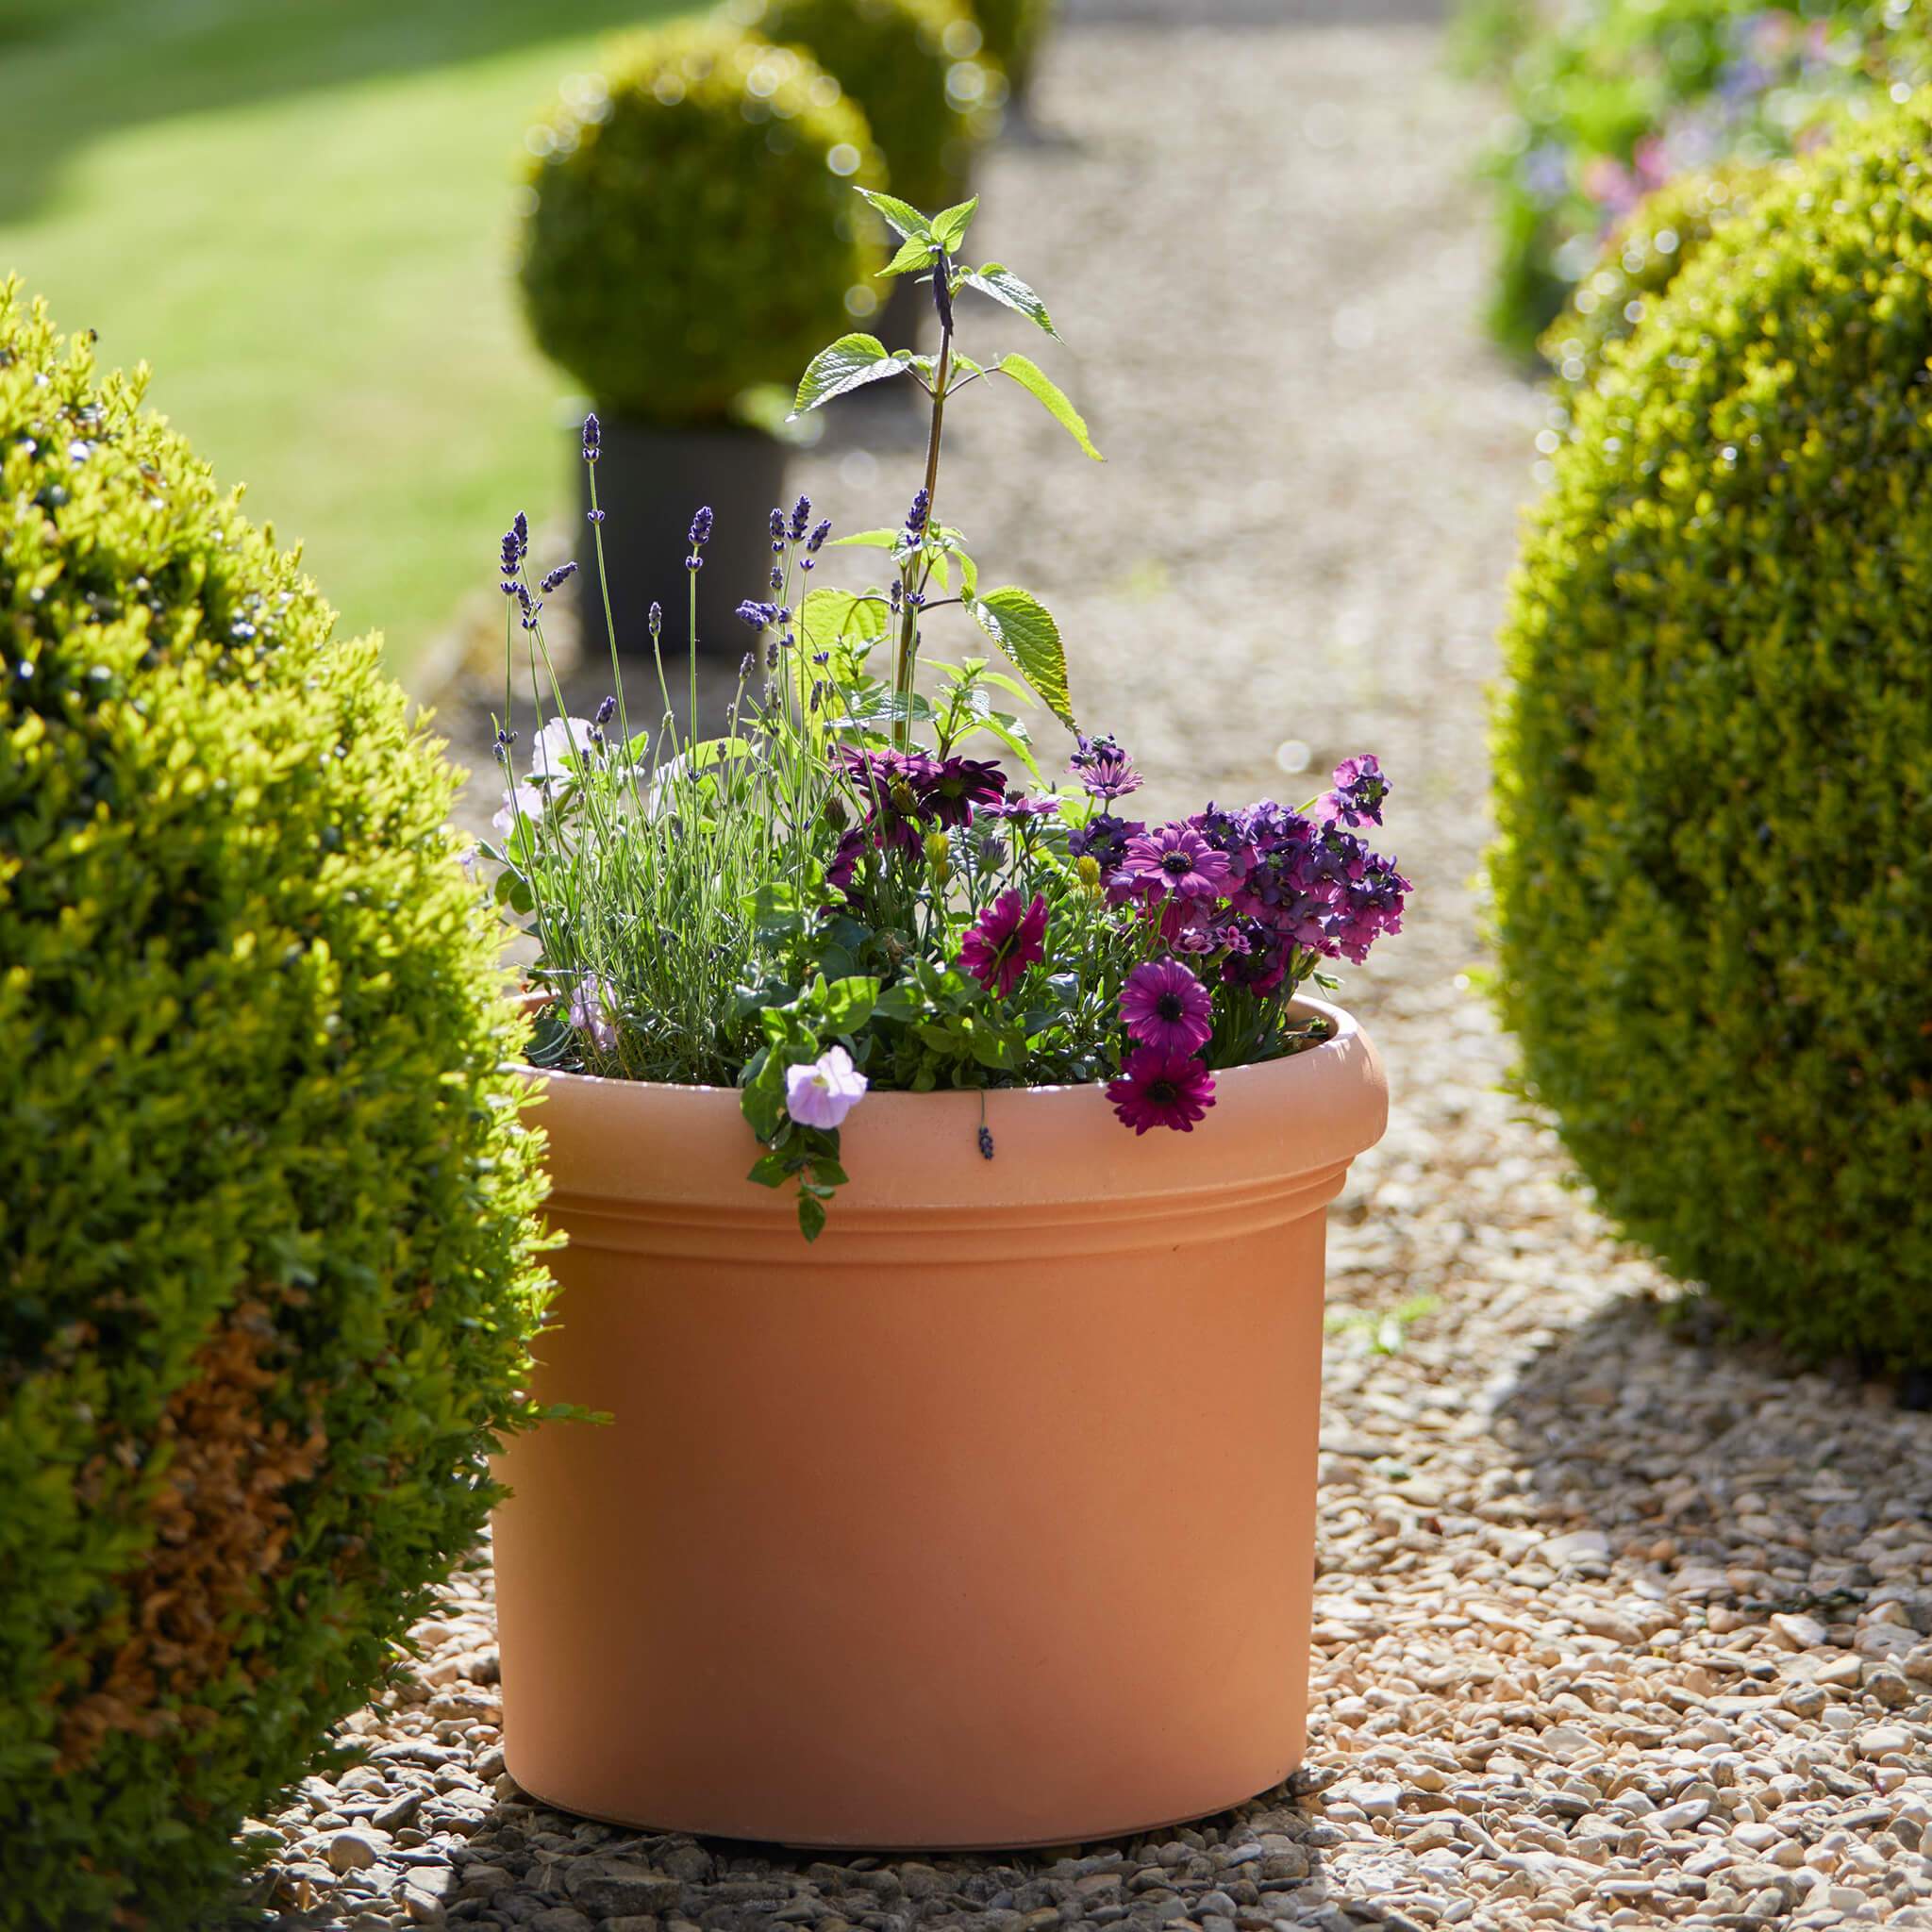 Make a statement: Best extra large pots for indoor & outdoor plants